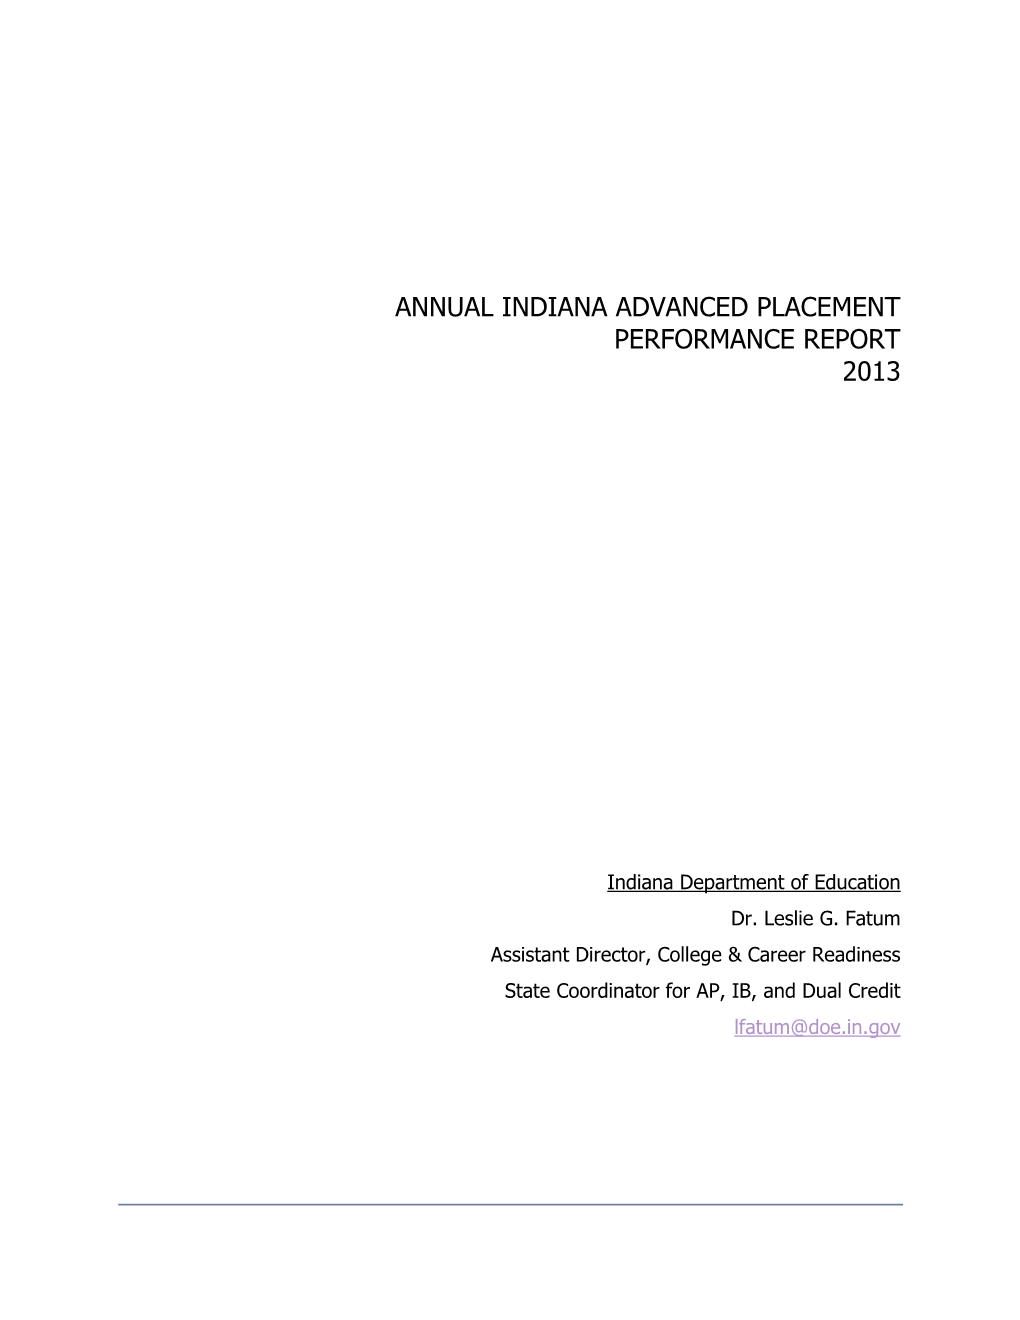 Annual Indiana Advanced Placement Performance Report 2013